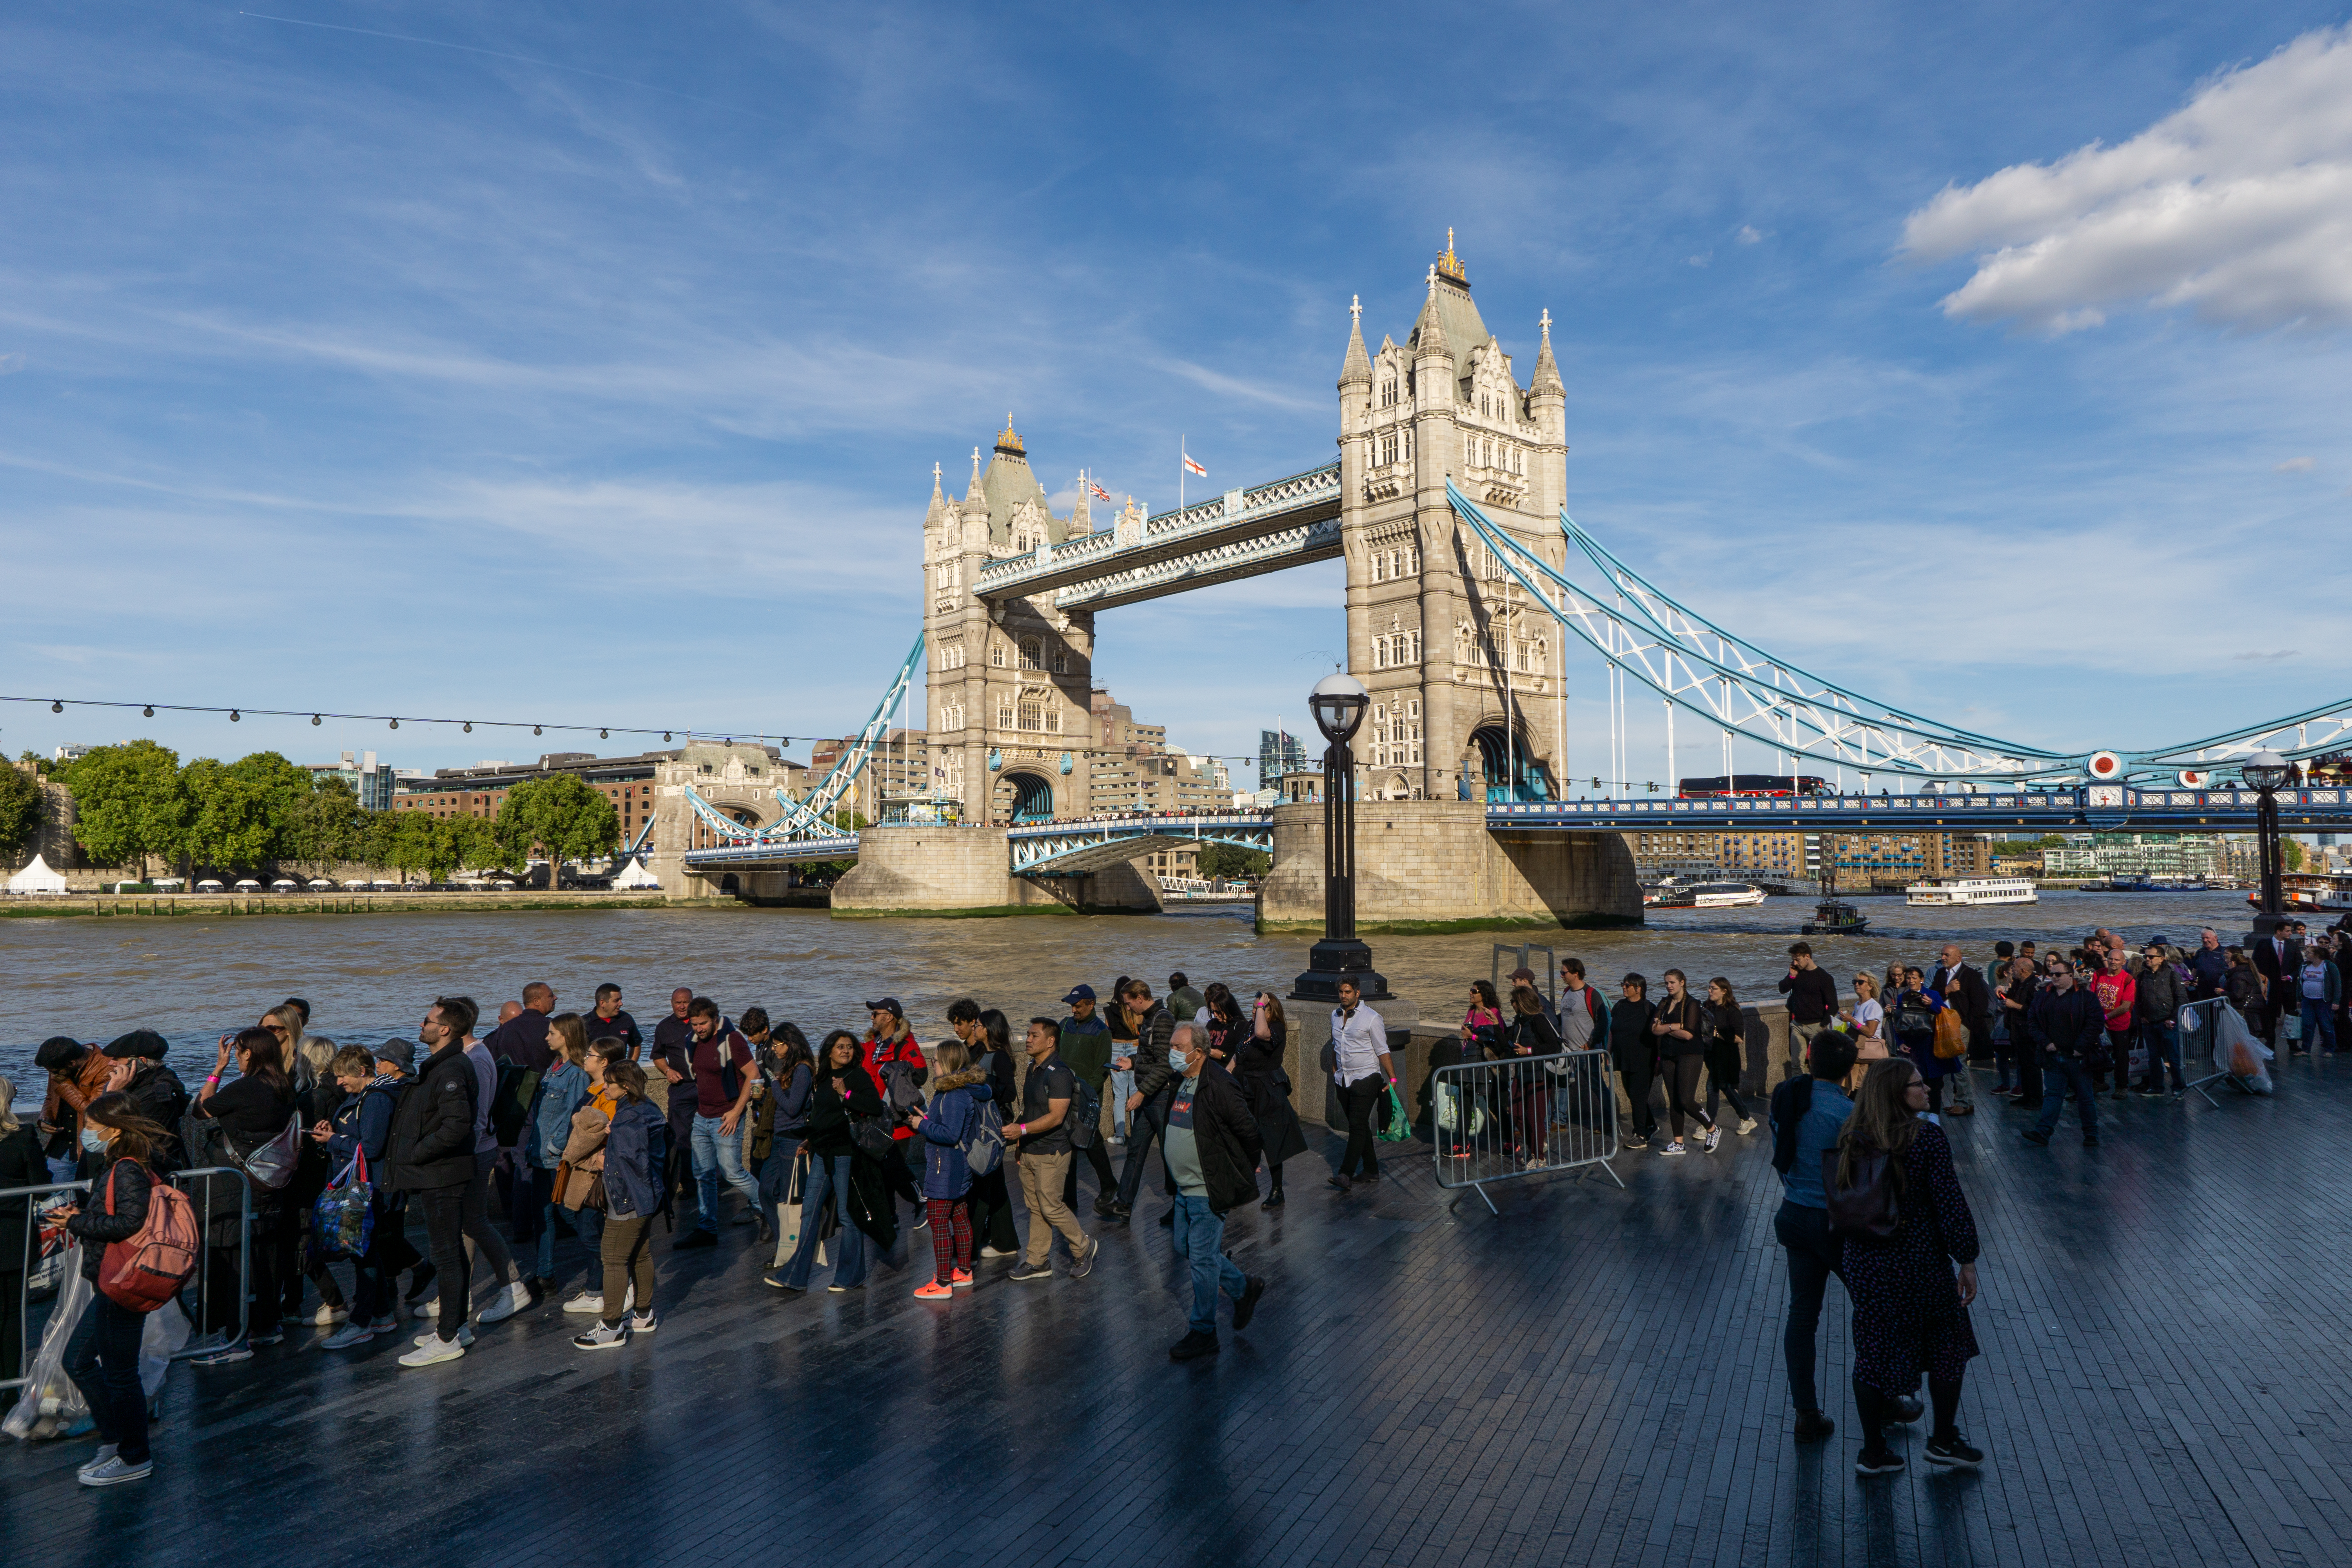 Sony E PZ 10-20mm F4 G Tower Bridge and The Queue sample image